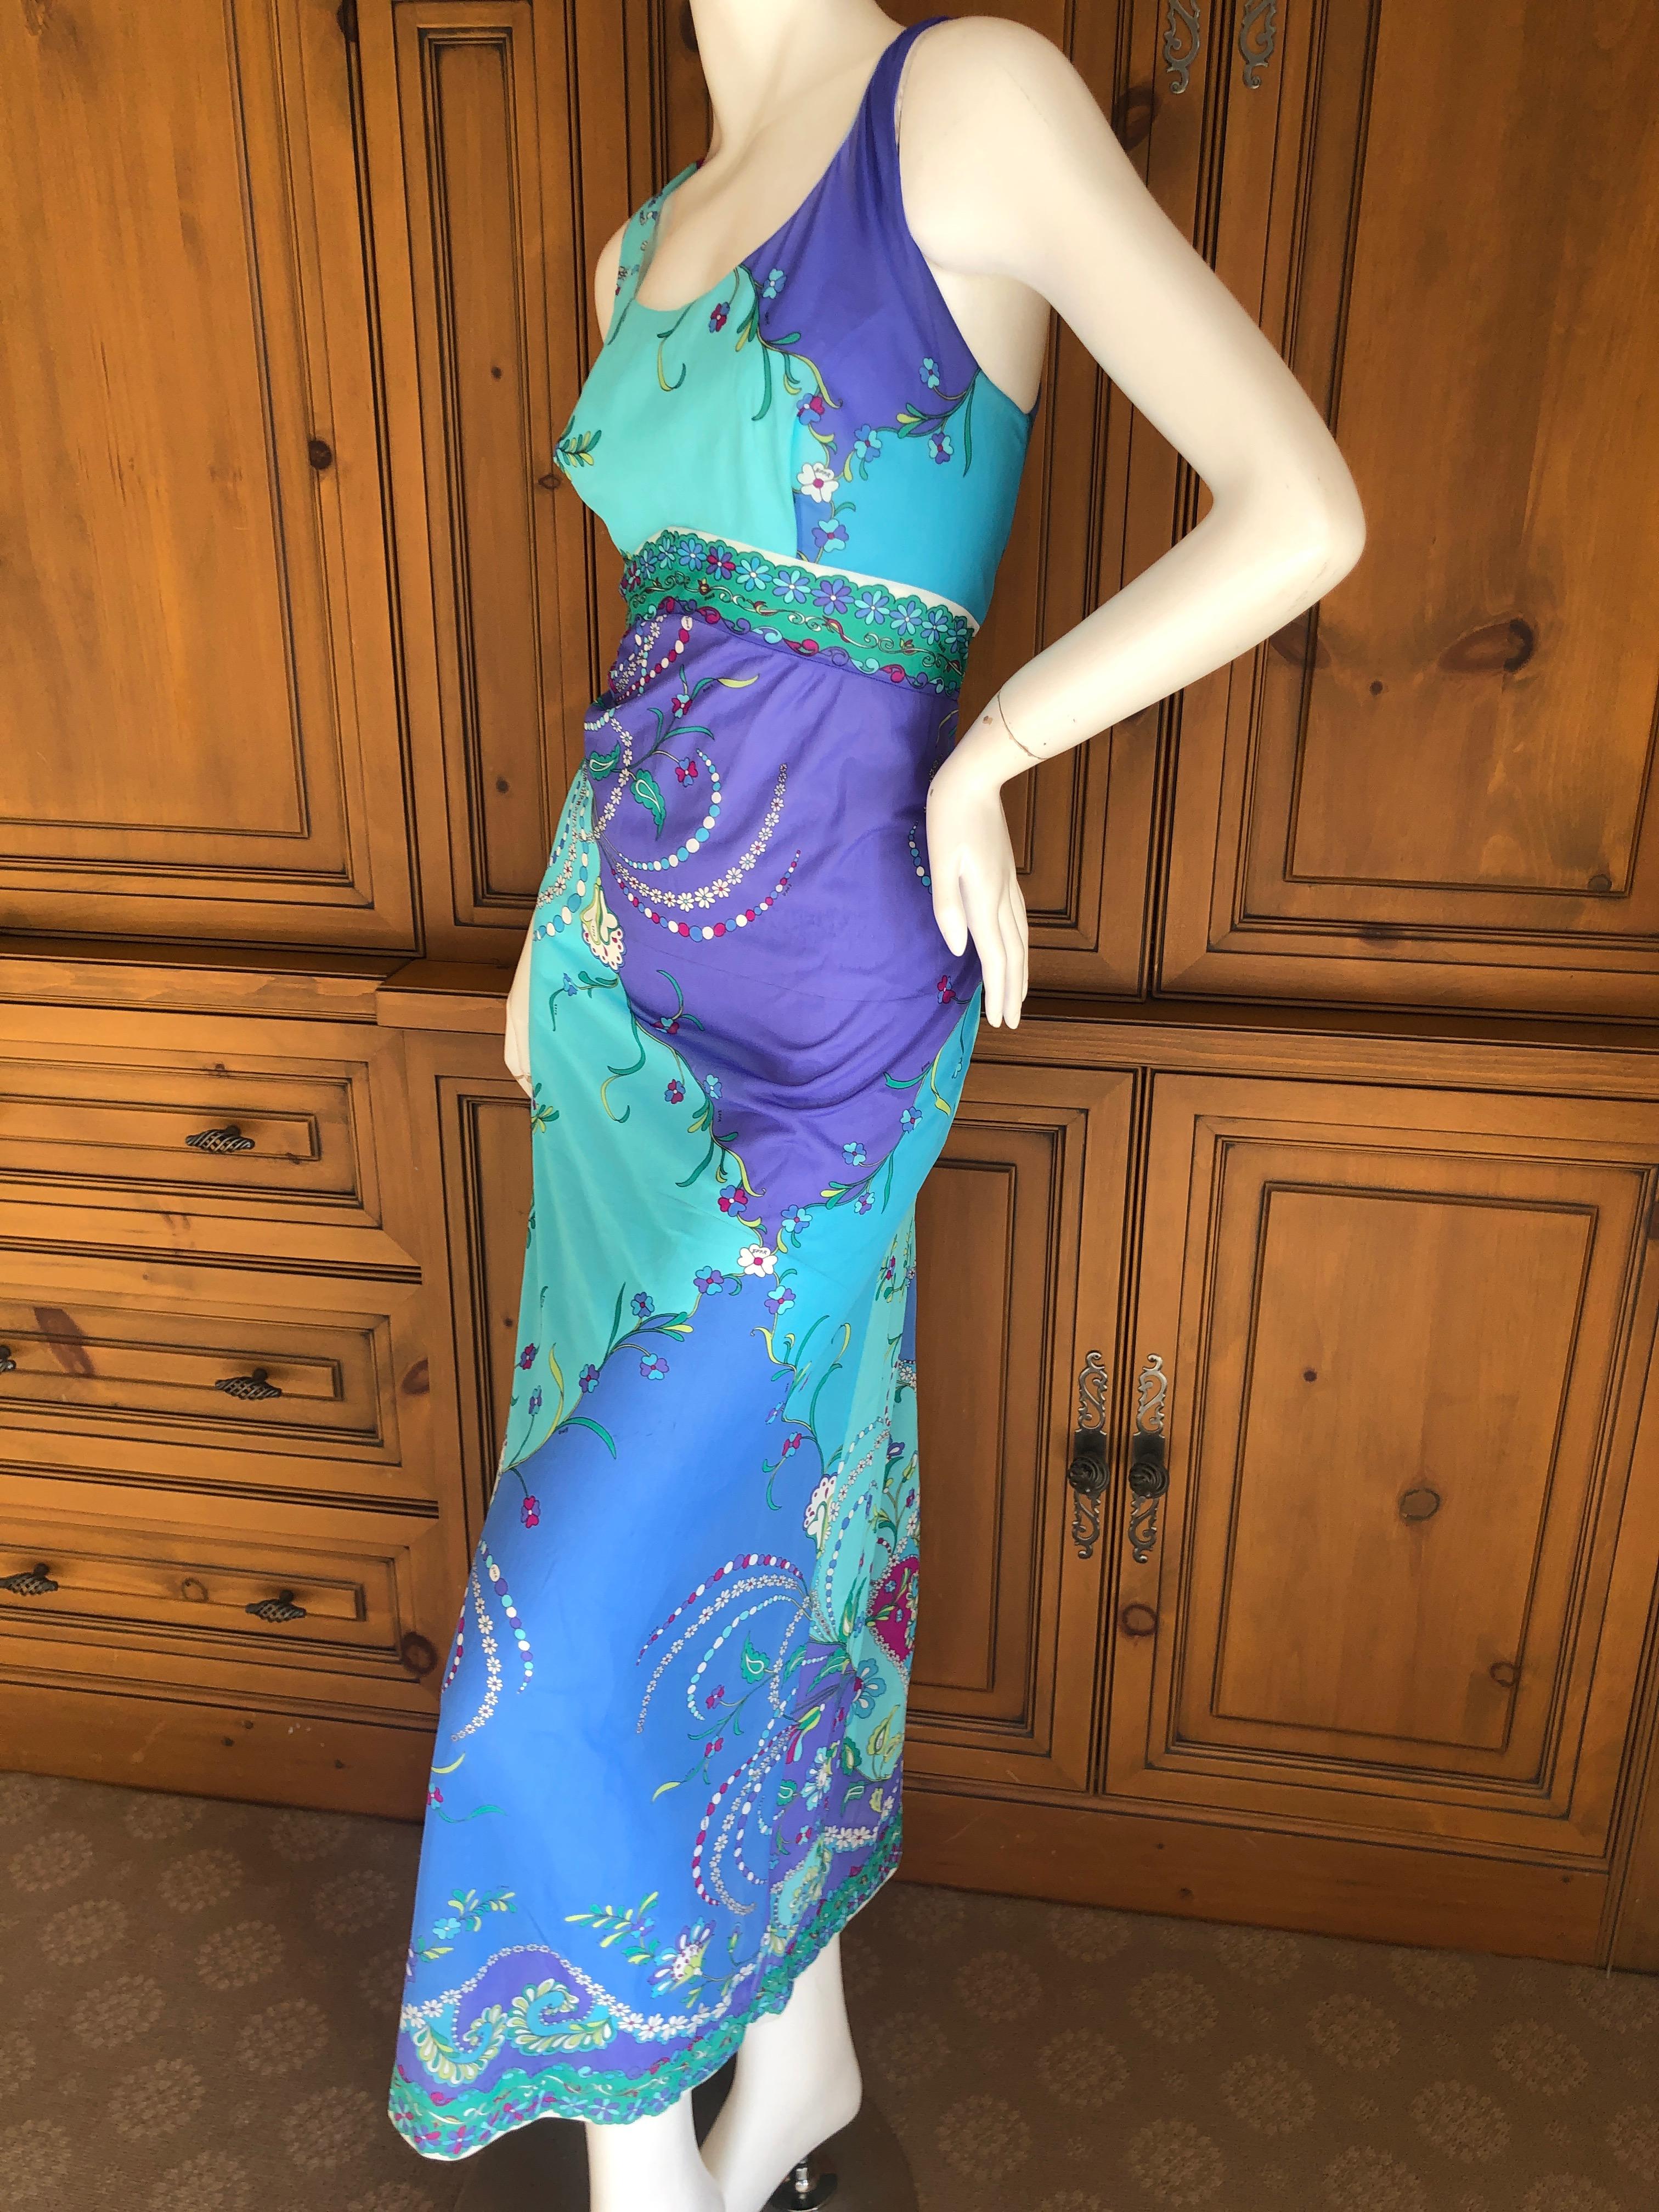 Emilio Pucci for Formfit Rogers Colorful Vintage 1960's Nightgown Dress For Sale 2